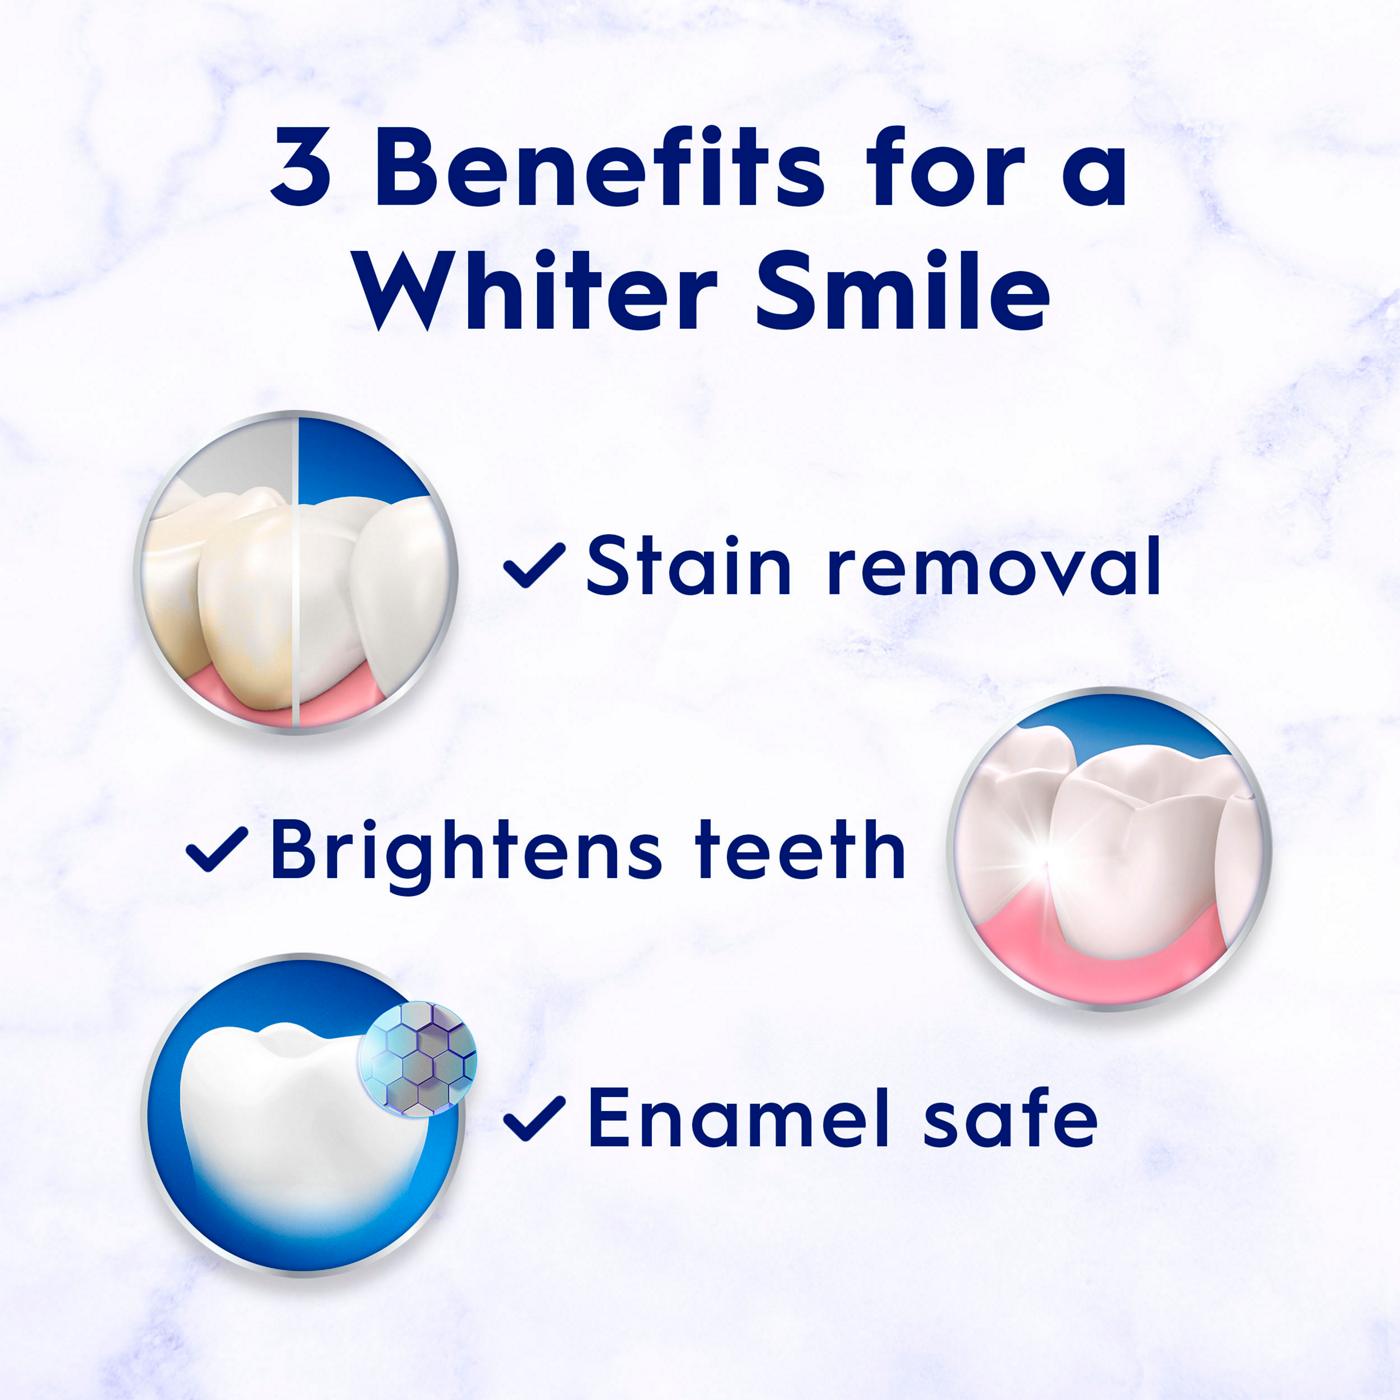 Crest 3D White Whitening Toothpaste - Radiant Mint; image 8 of 8